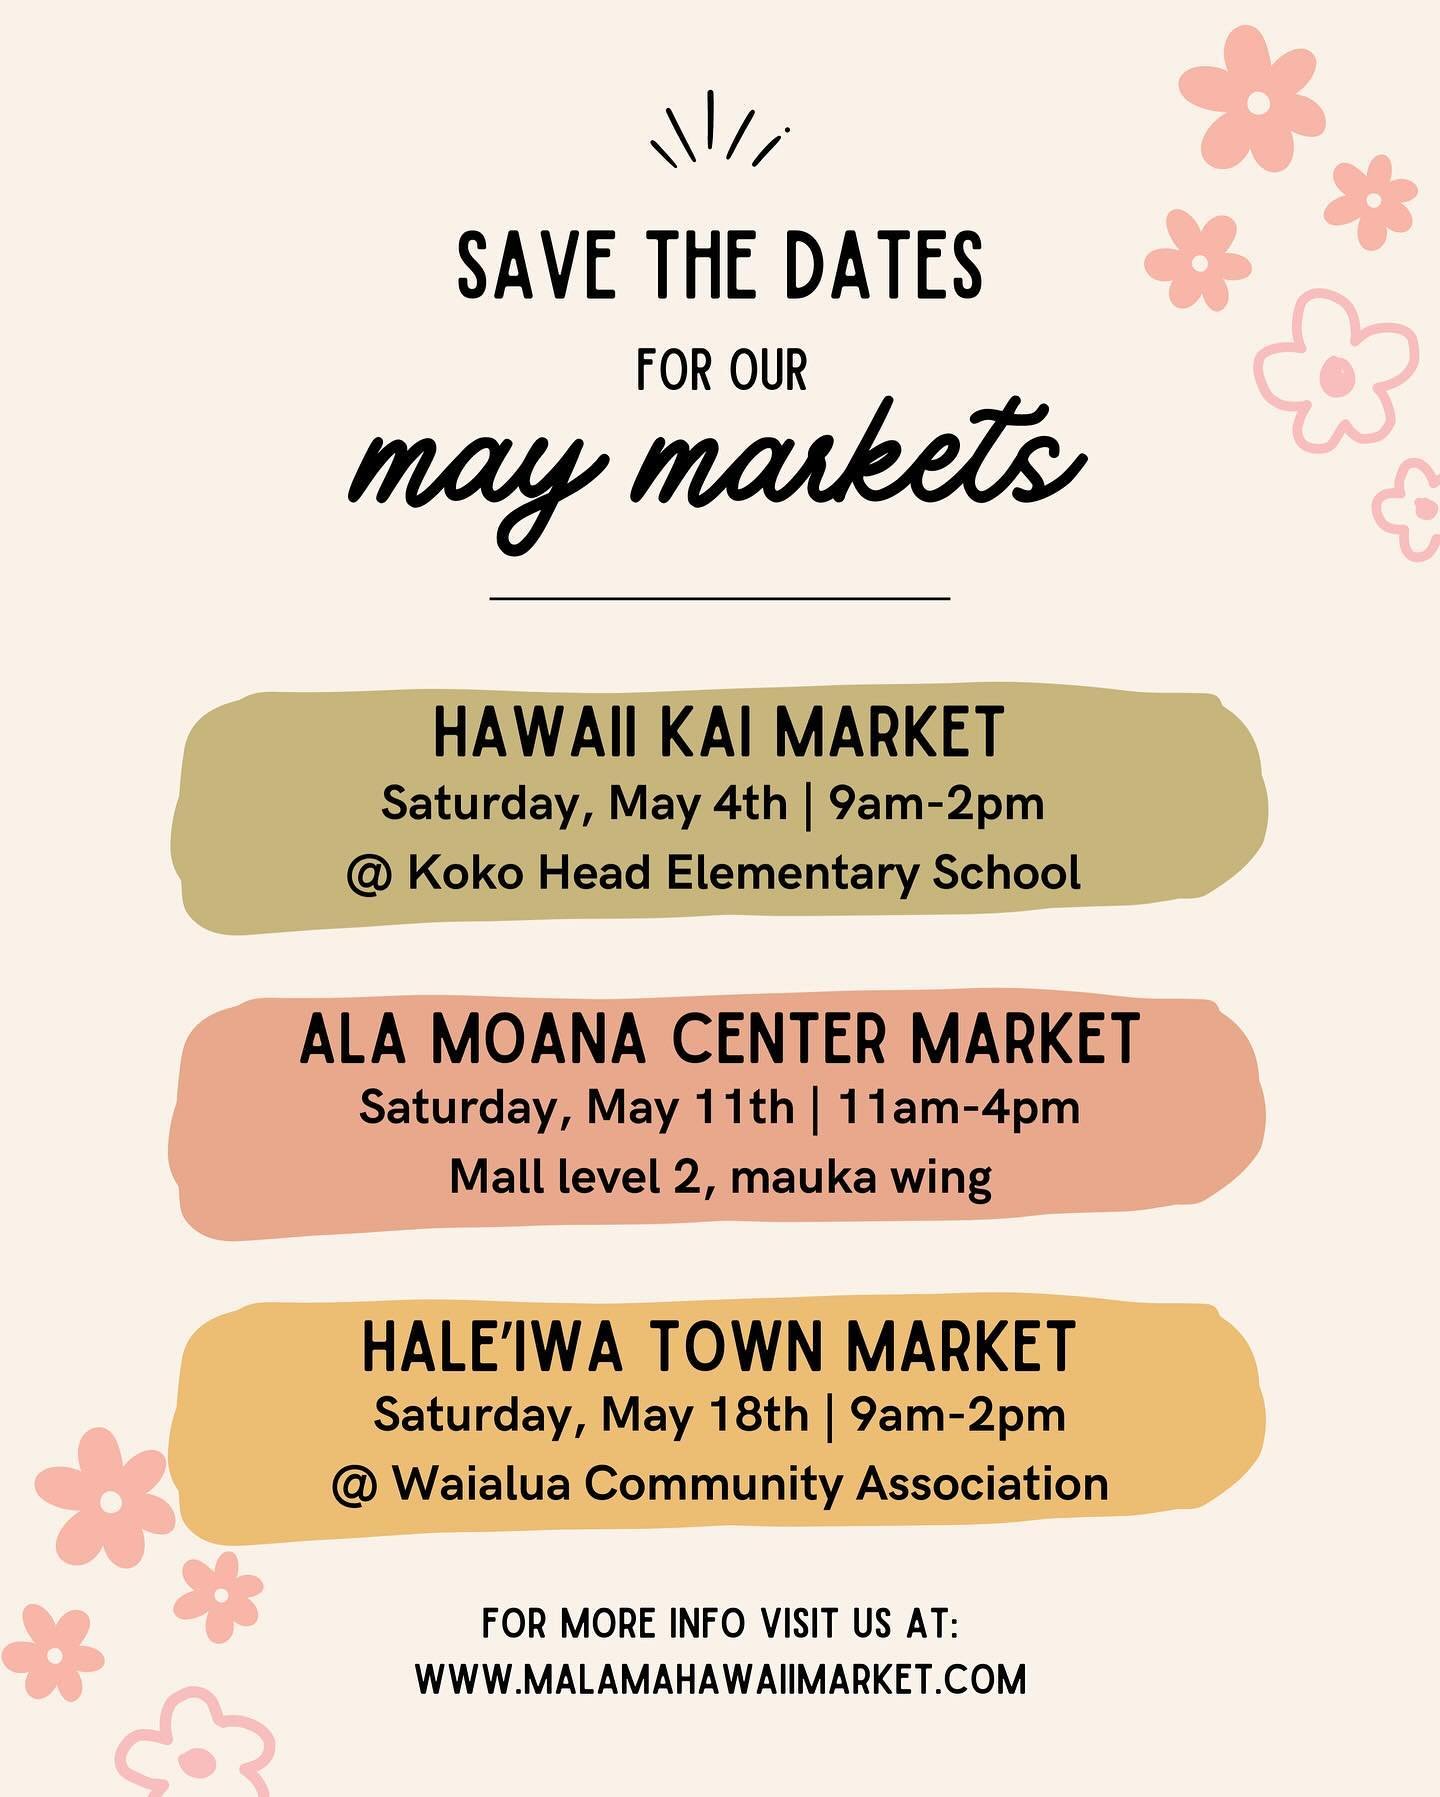 🌸 SAVE THE DATES 🌸 for our 𝗠𝗮𝘆 𝗠𝗮𝗿𝗸𝗲𝘁𝘀 in Hawai&rsquo;i Kai, Ala Moana Center, &amp; Hale&lsquo;iwa Town! 

Each of our markets are brimming with unique goods to discover from our carefully curated lineup of makers, artists, designers, an